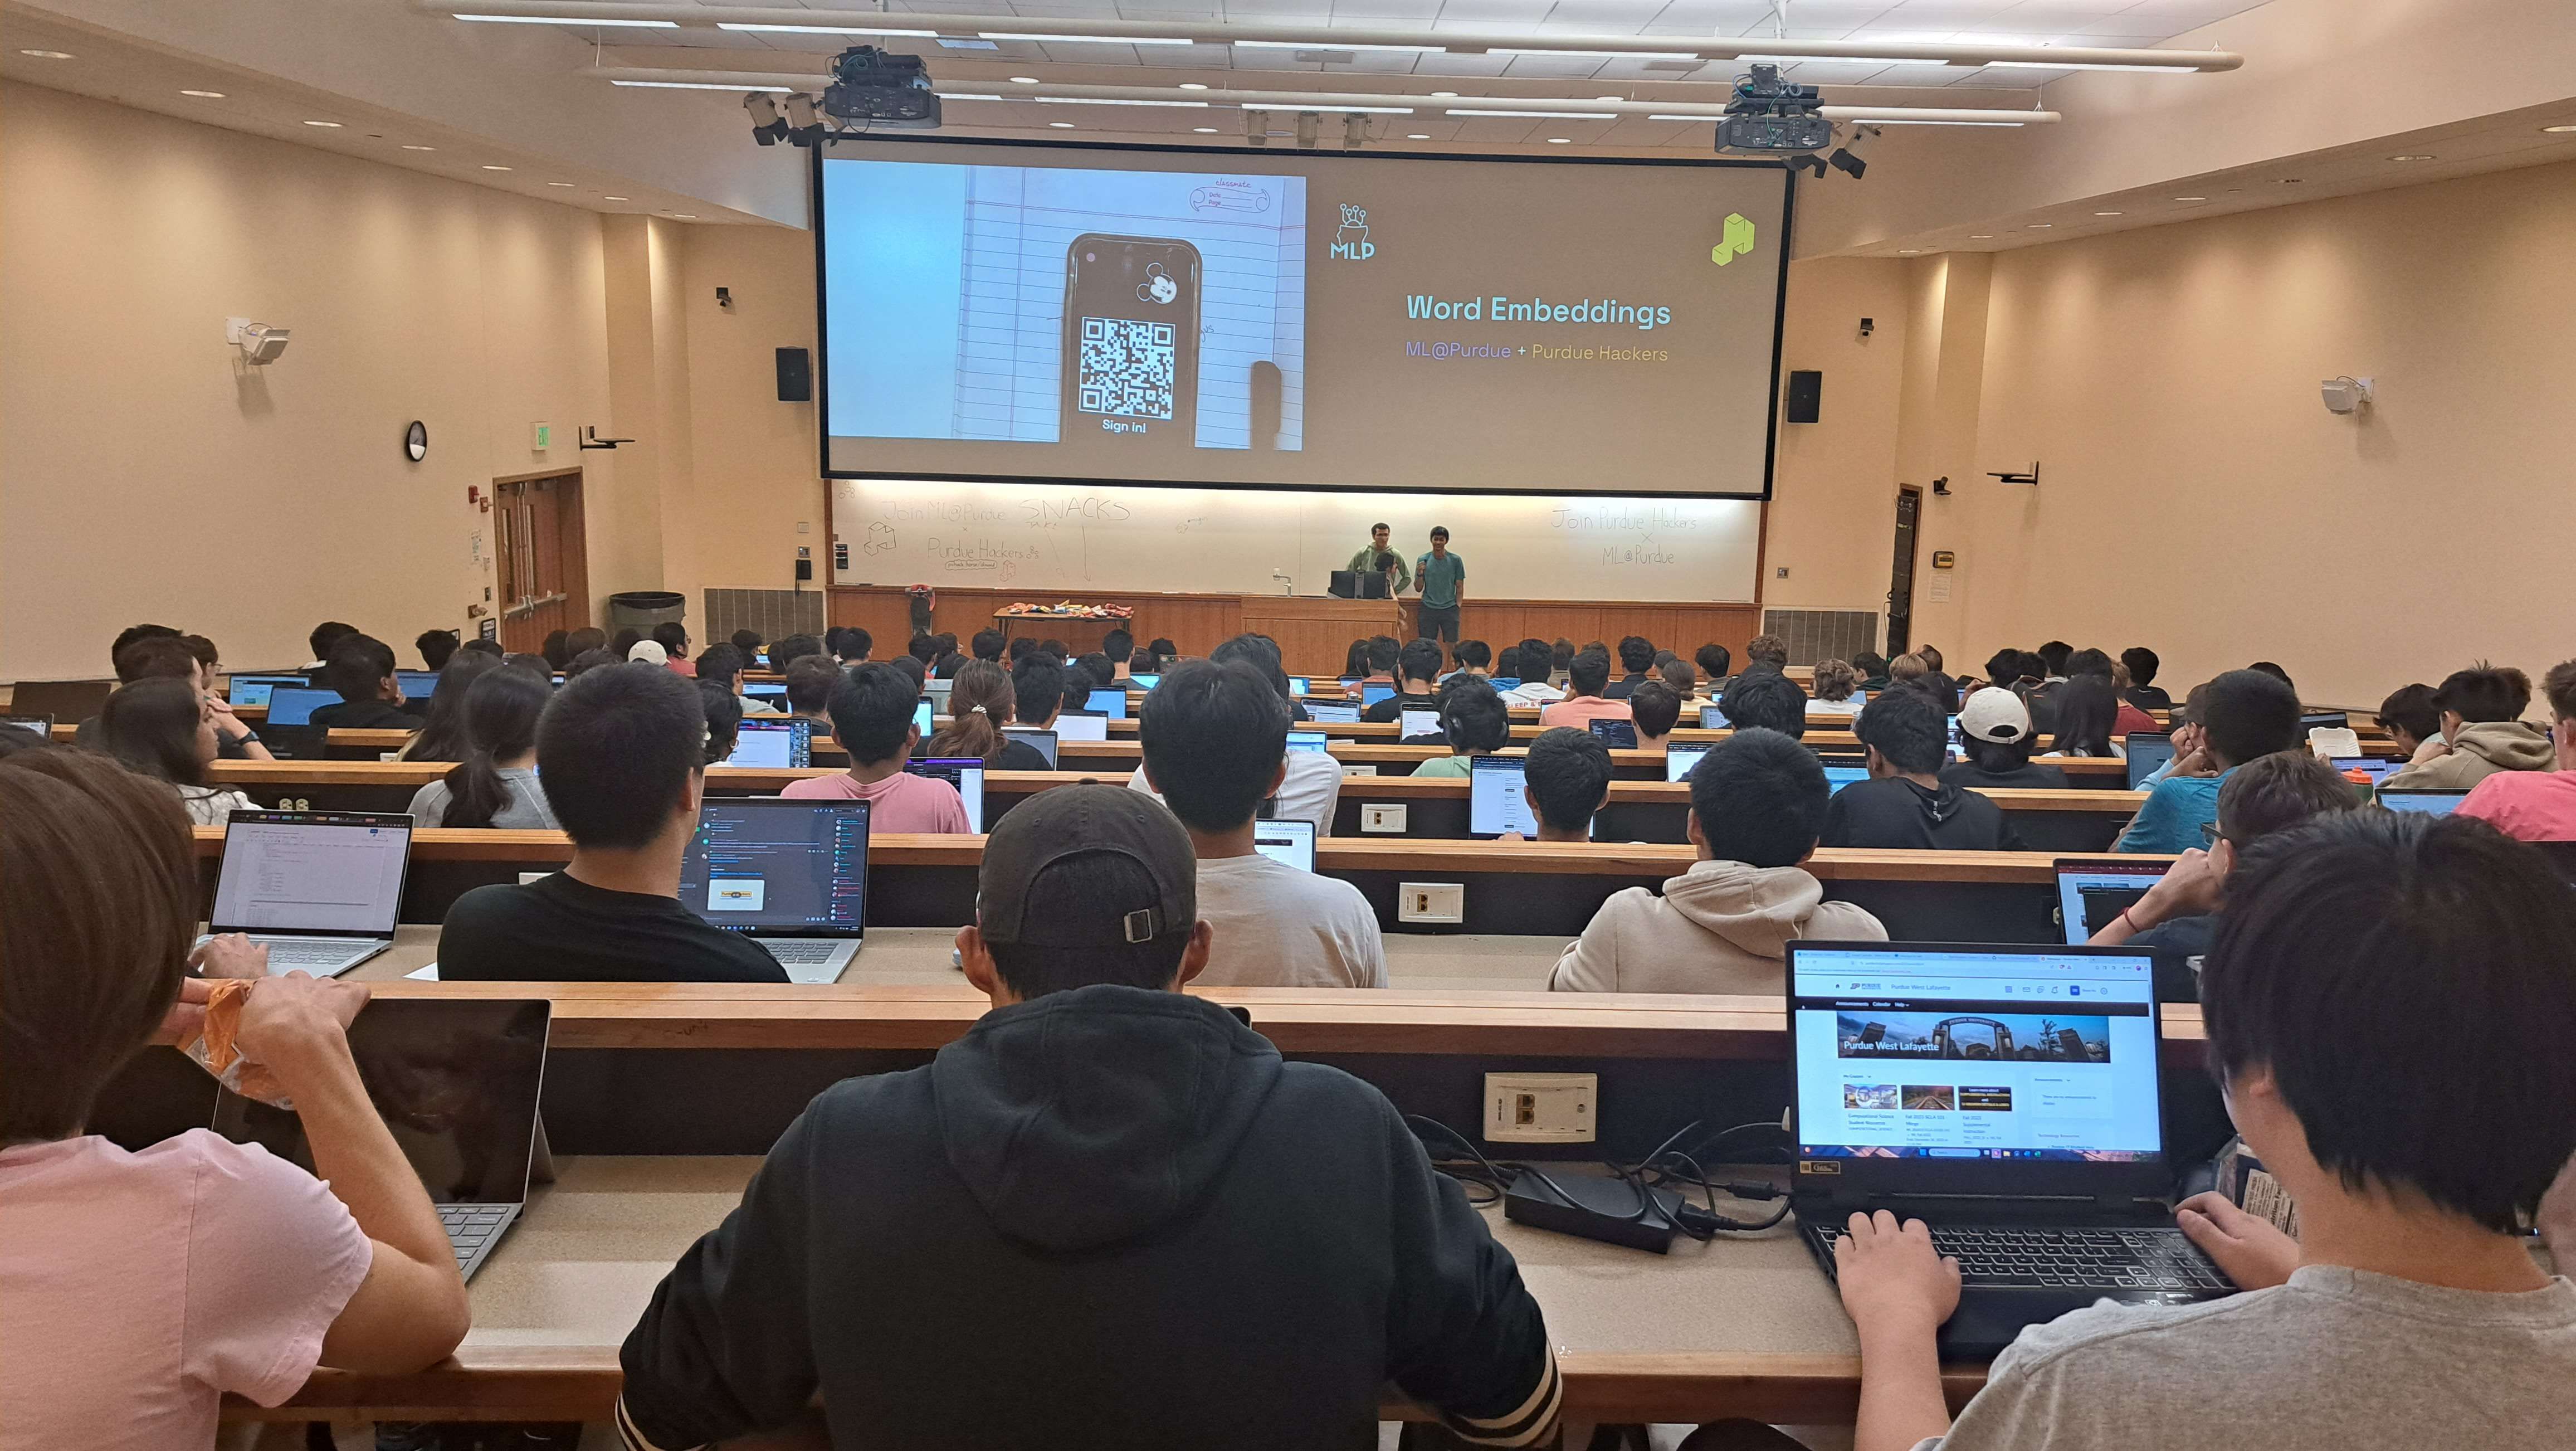 A picture from the back of a lecture hall. Every seat is full of students, and at the front of the room a small group of students are presenting a workshop on word embeddings